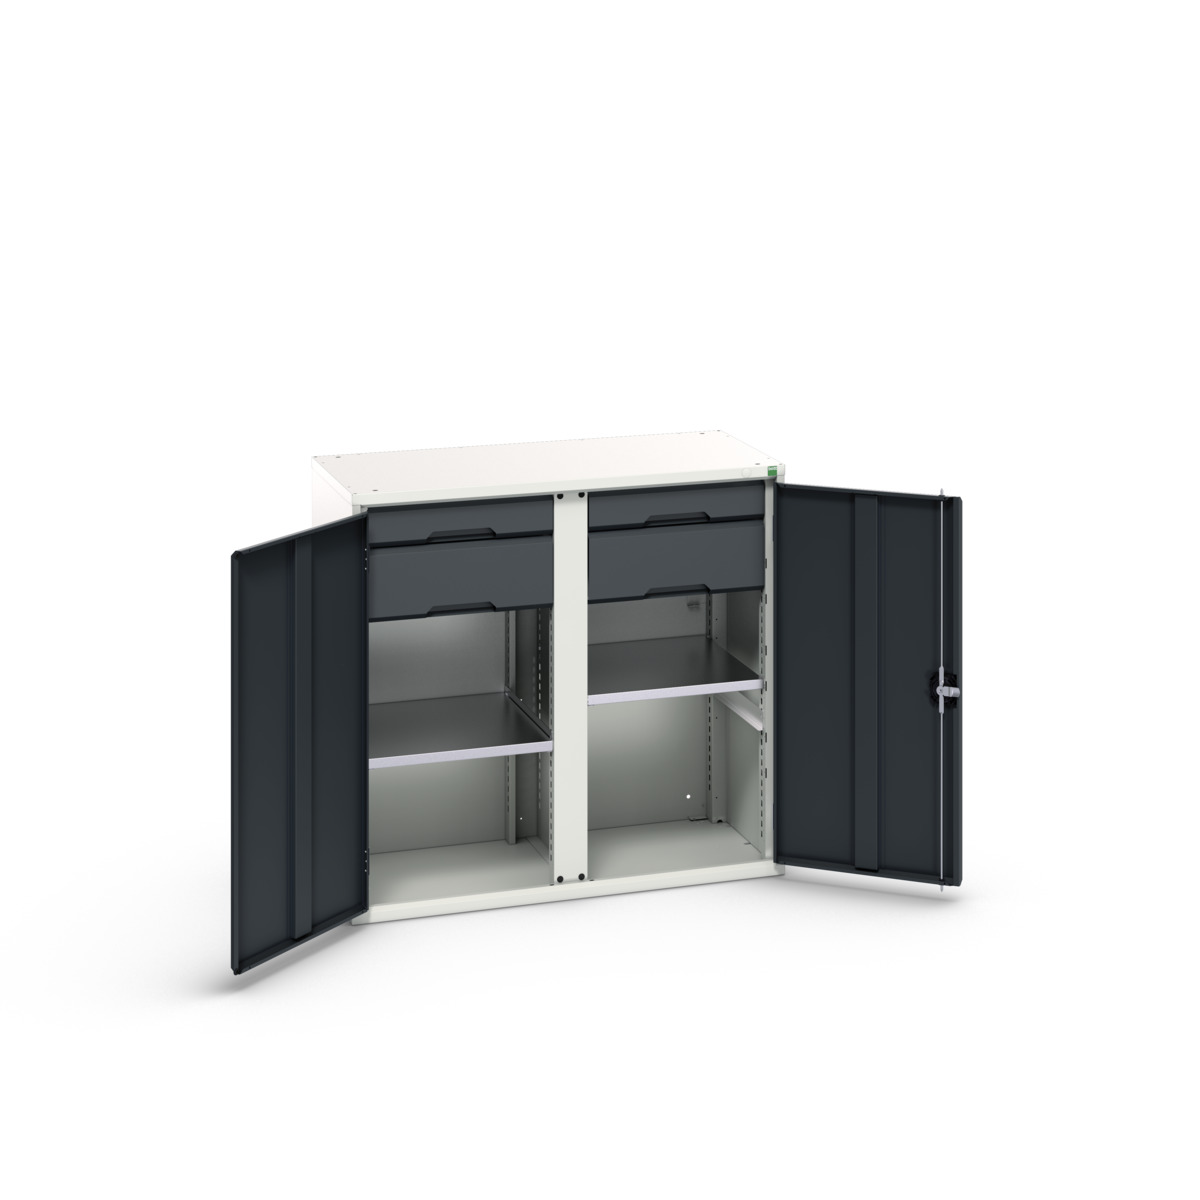 16926556. - verso kitted cupboard